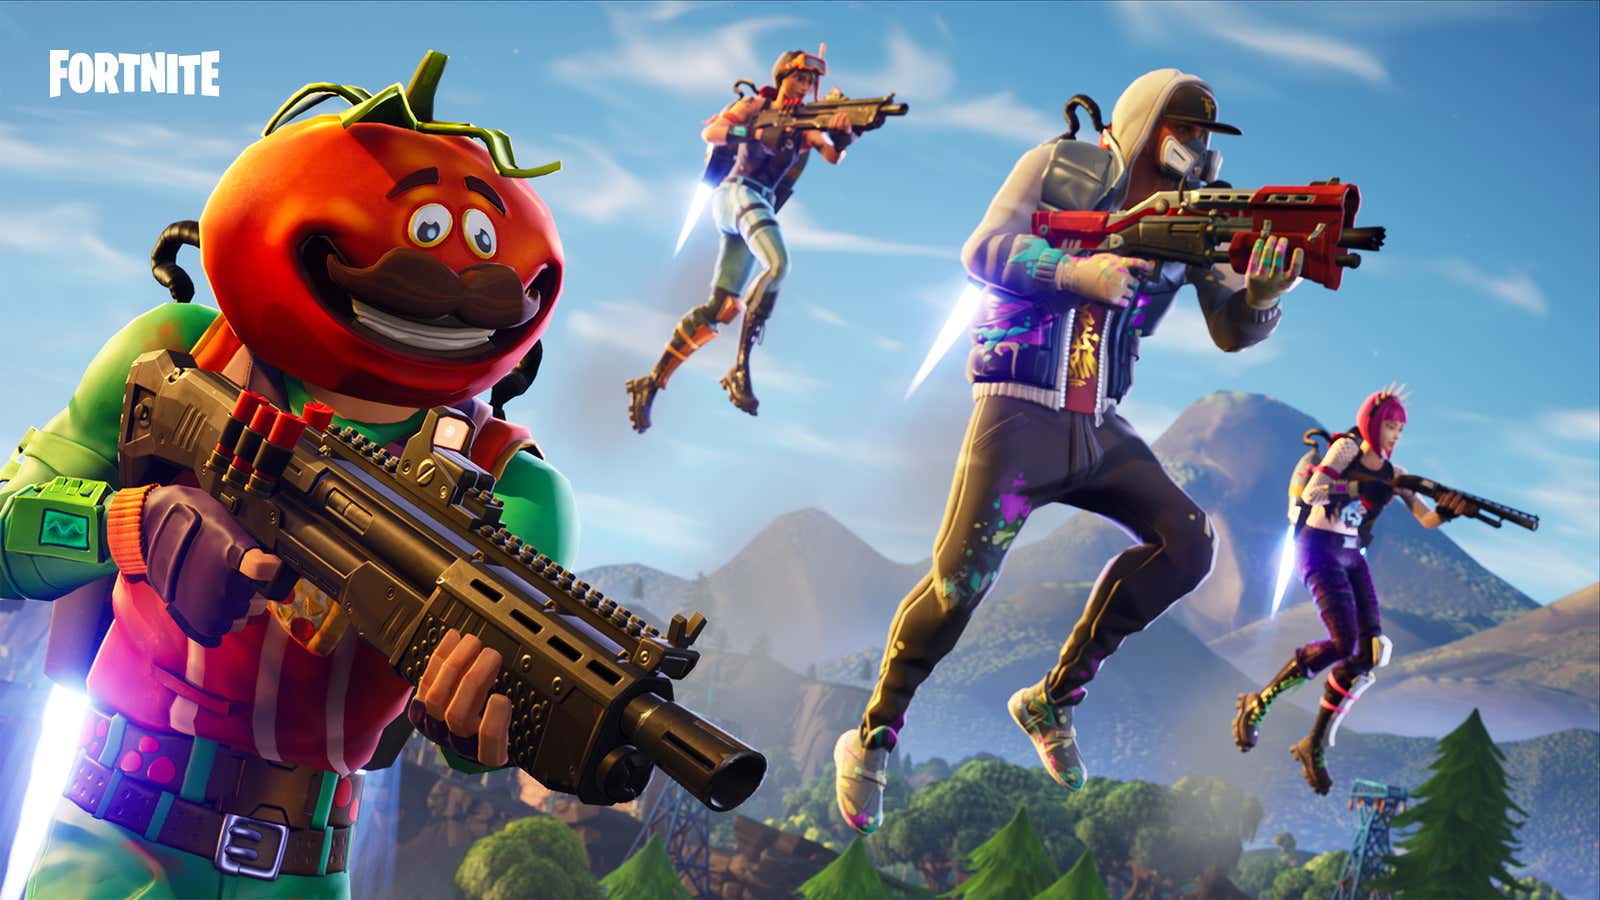 The first Fortnite Battle Royale World Cup was announced for late 2019.